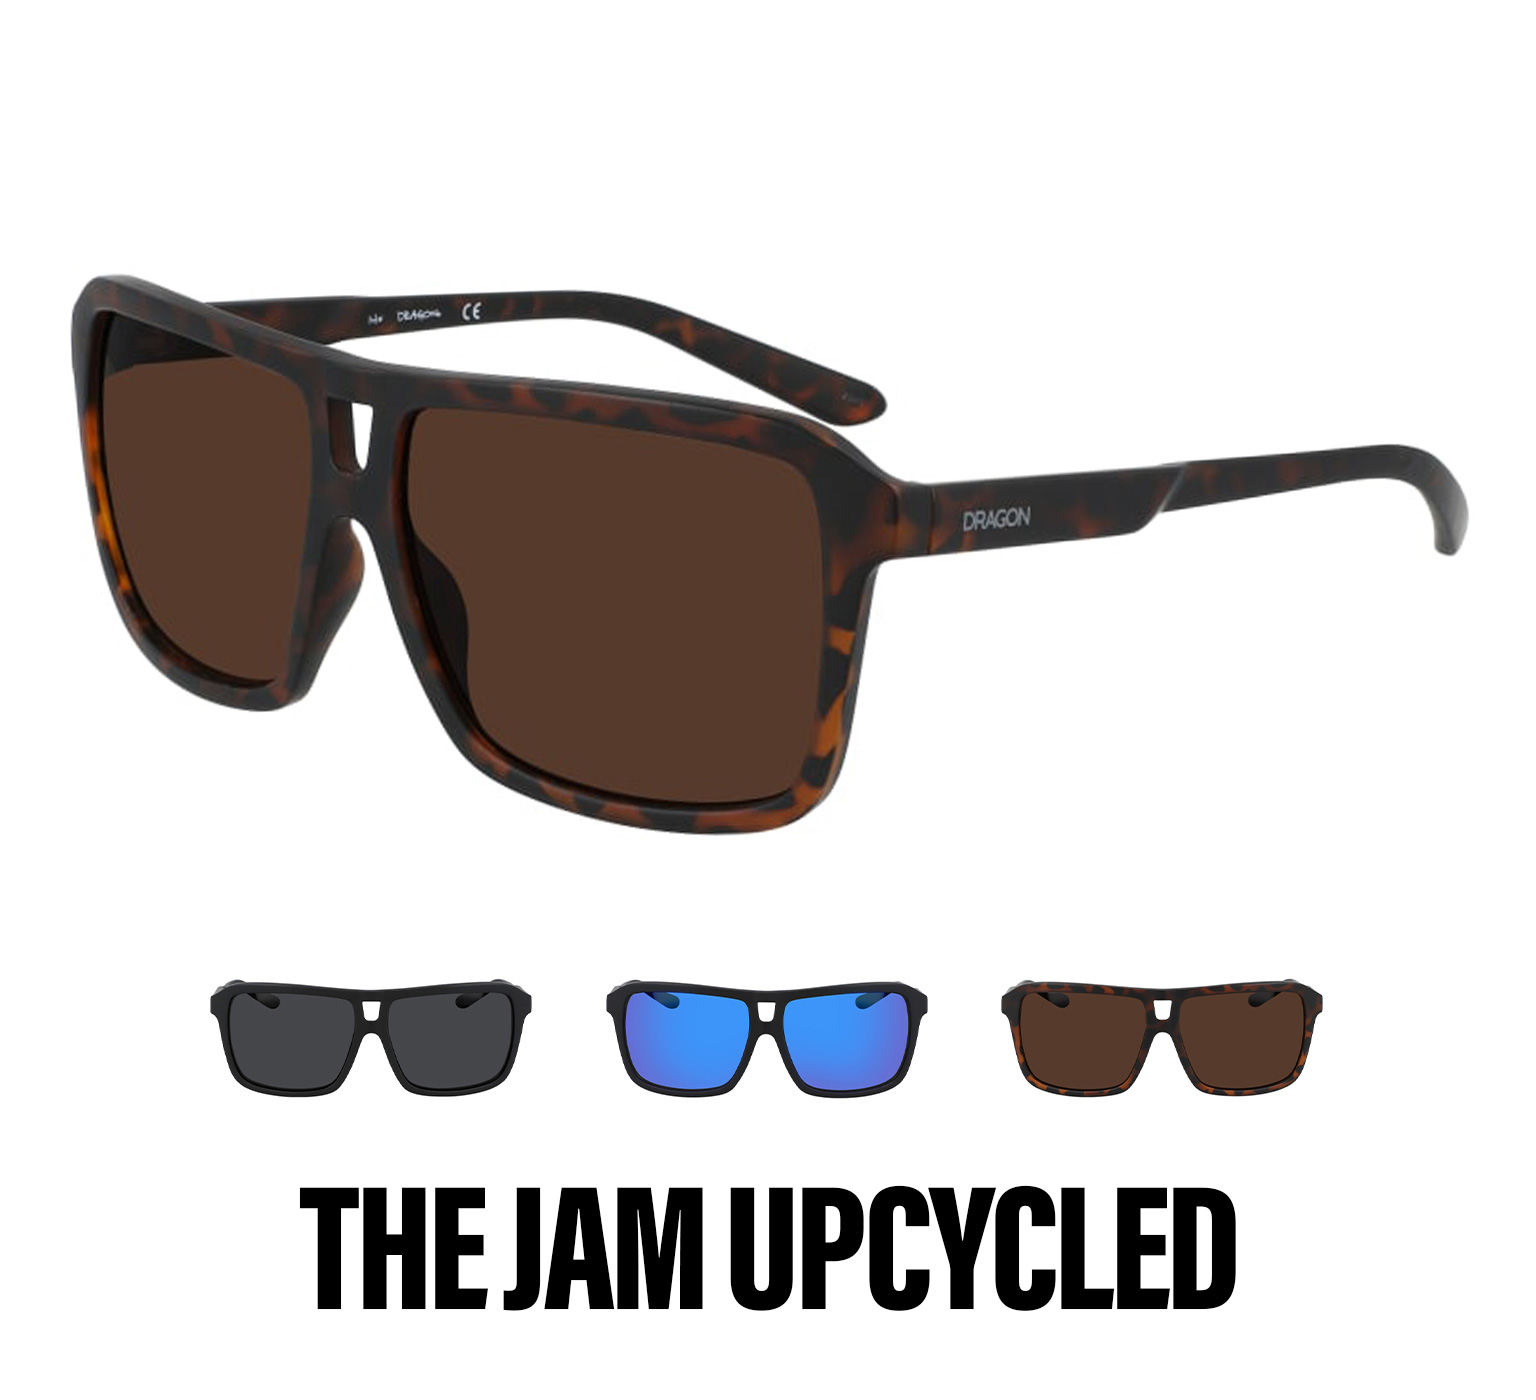 The Jam Upcycled